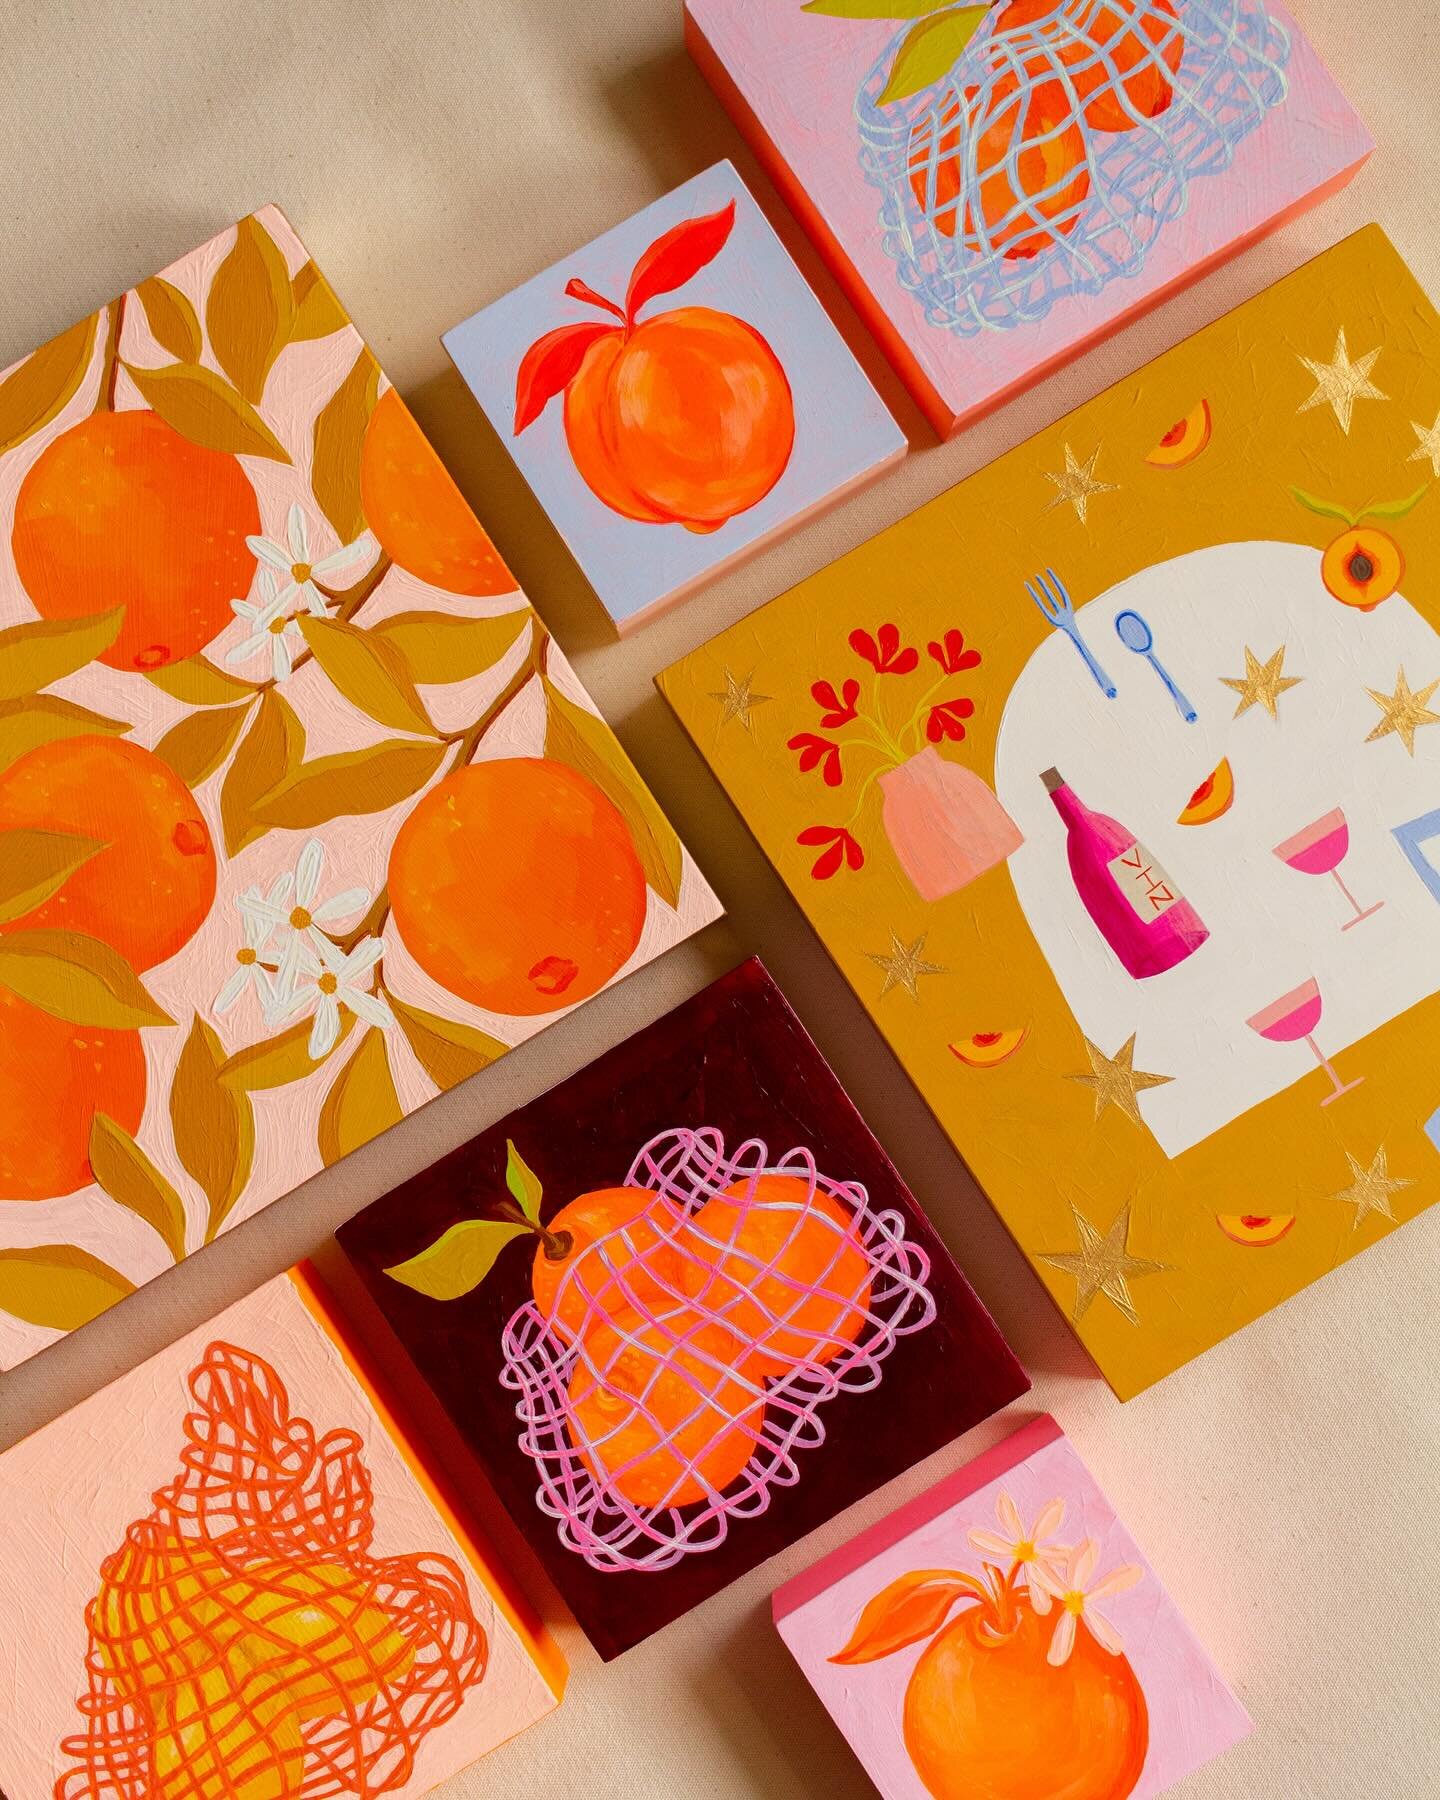 🌼 S H O P  U P D A T E  T O D A Y 🌼

A lil shop update complete with seven new paintings on panel will be happening at 2:00pm EST today!

I&rsquo;m so excited to be playing with these fruit motifs and brighter (neon!!) colors as I explore my creati